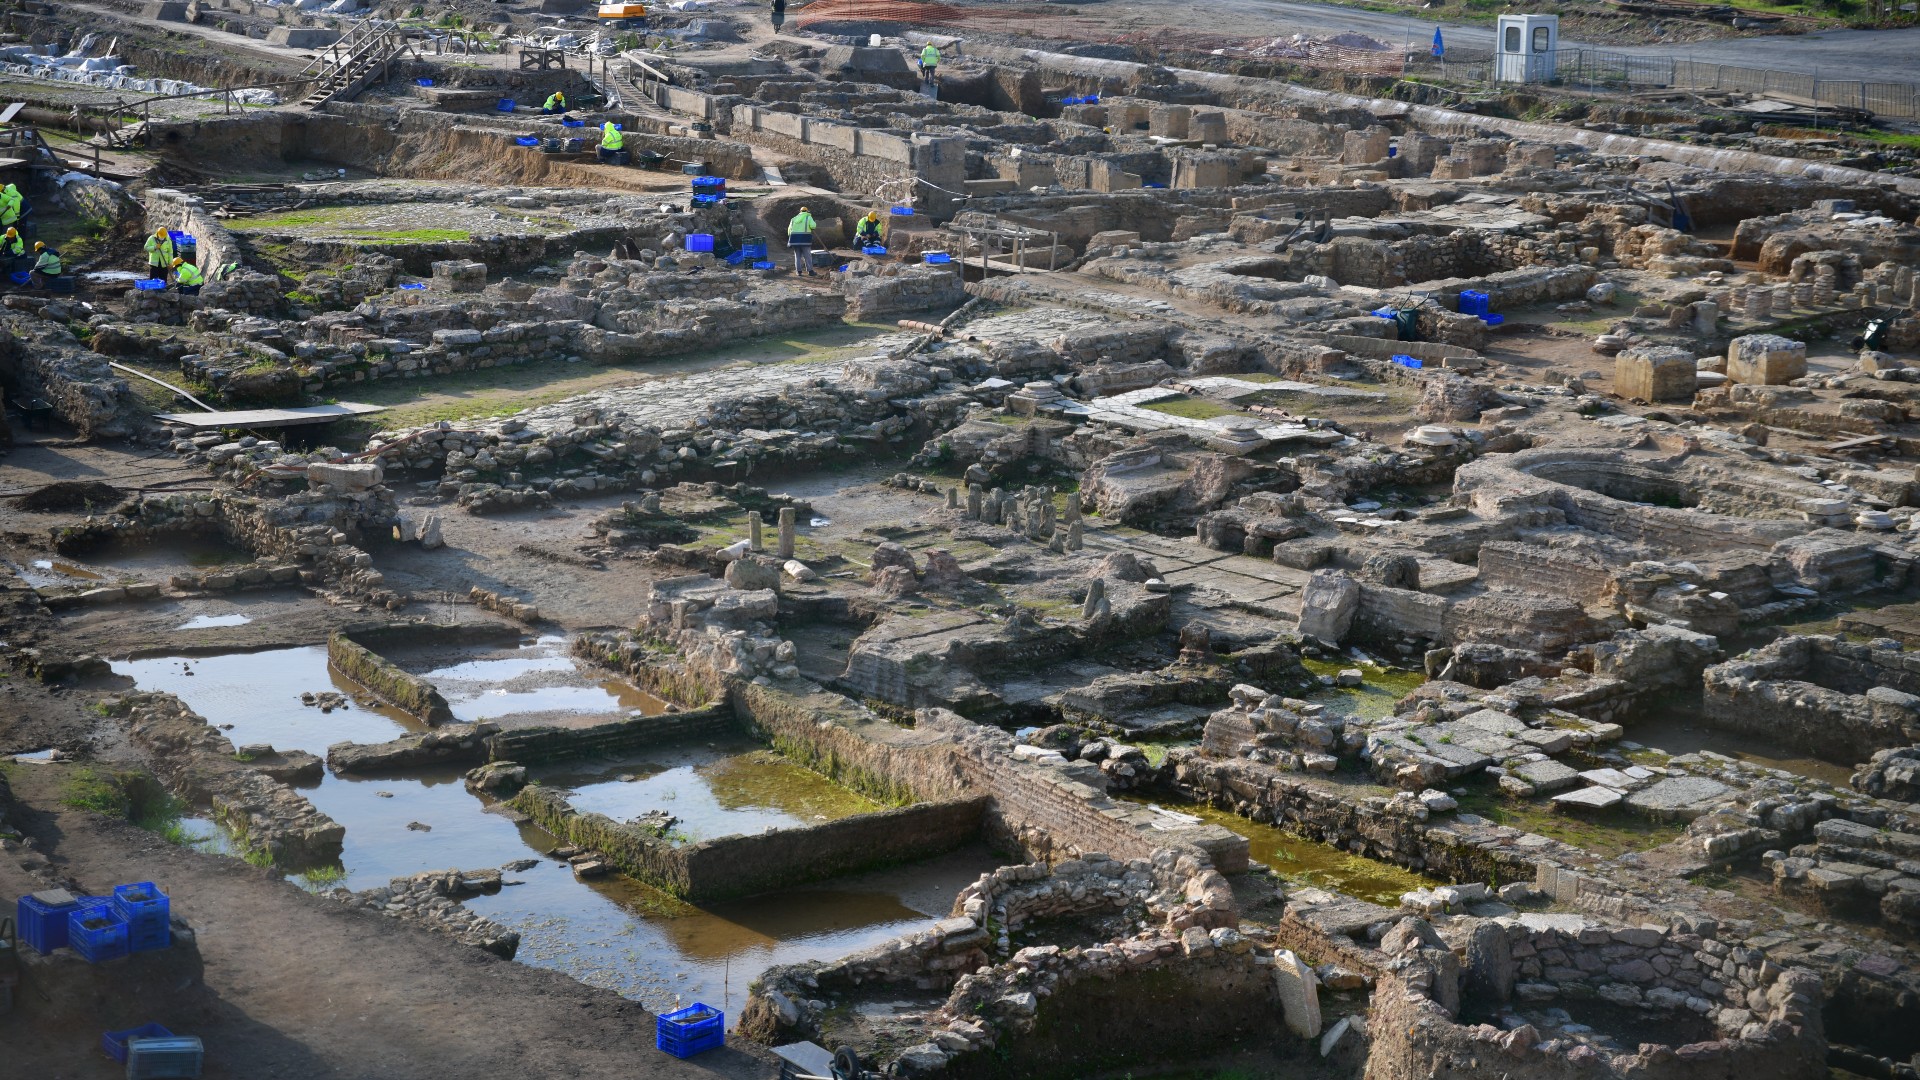 Panoramic view of the excavation site in Istanbul, Turkey. There are quite a few foundations made of stone bricks. There was a team of high-visibility helmeted men exploring the ruins.